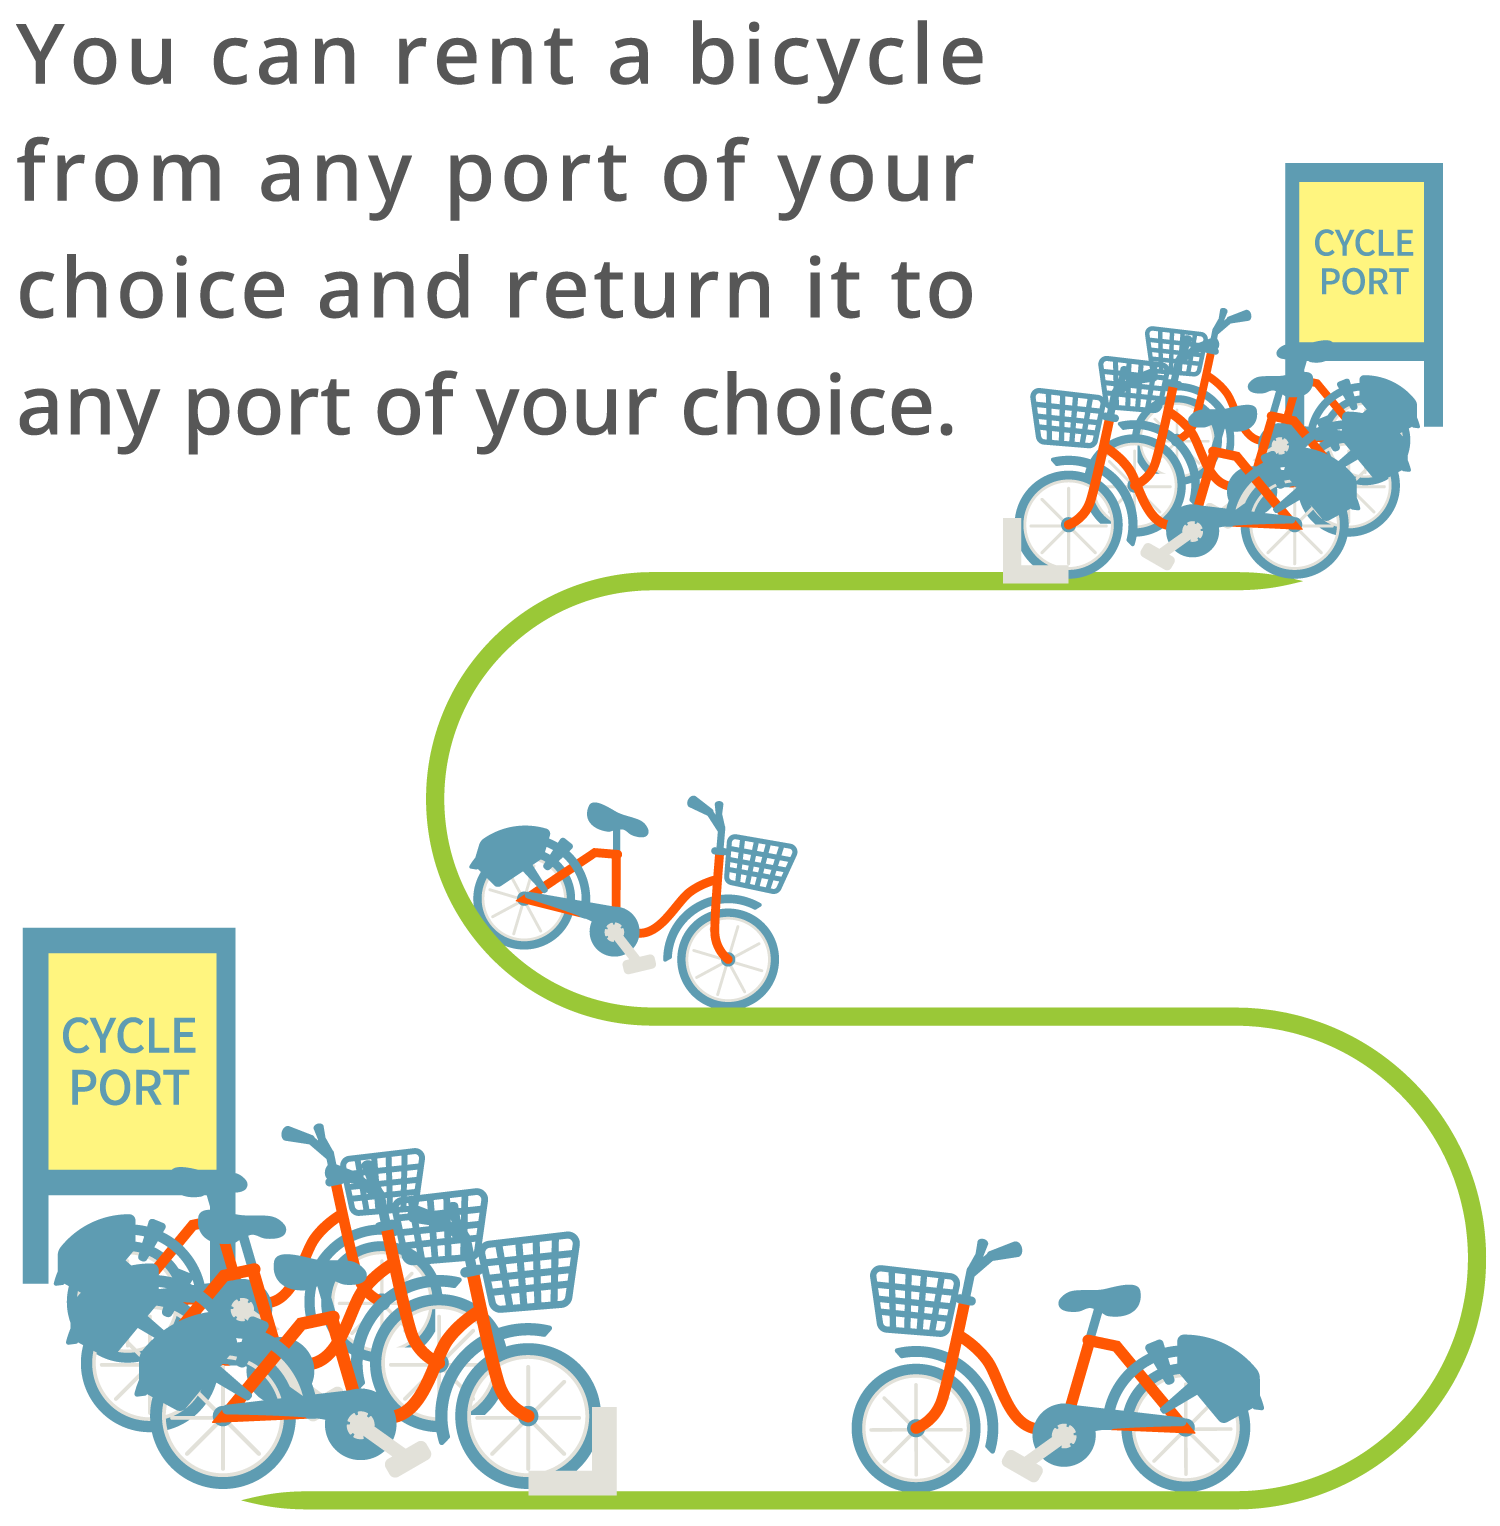 You can rent a bicycle from any port of your choice and return it to any port of your choice.